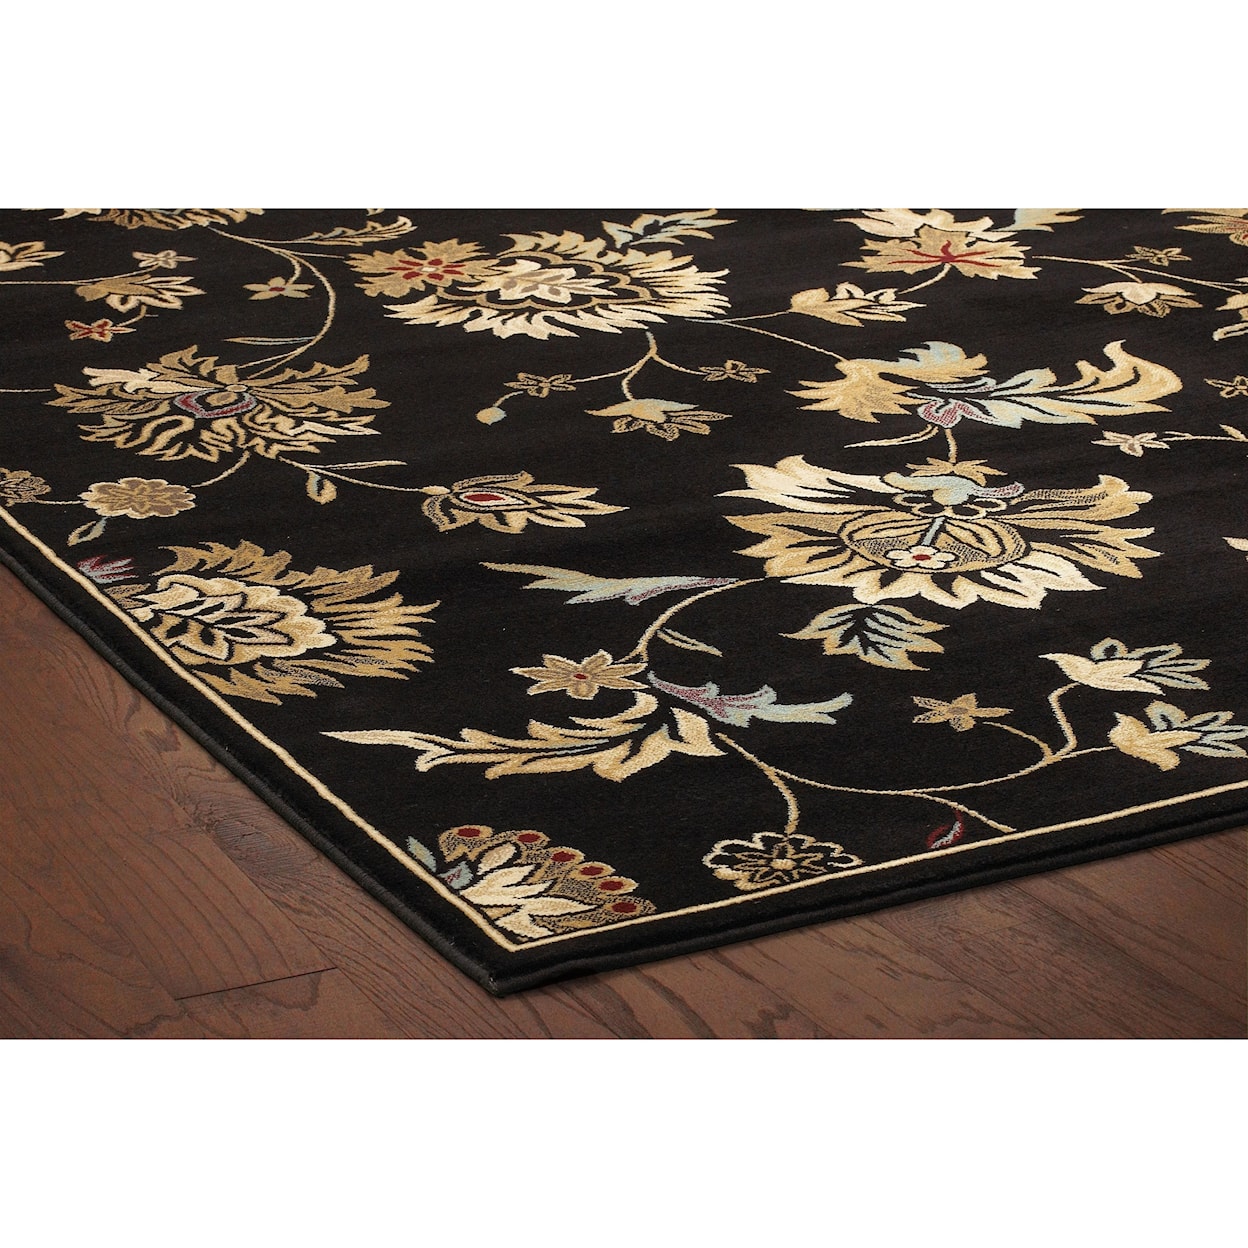 Rizzy Home Chateau 7'10" x 10'10" Rectangle Rug